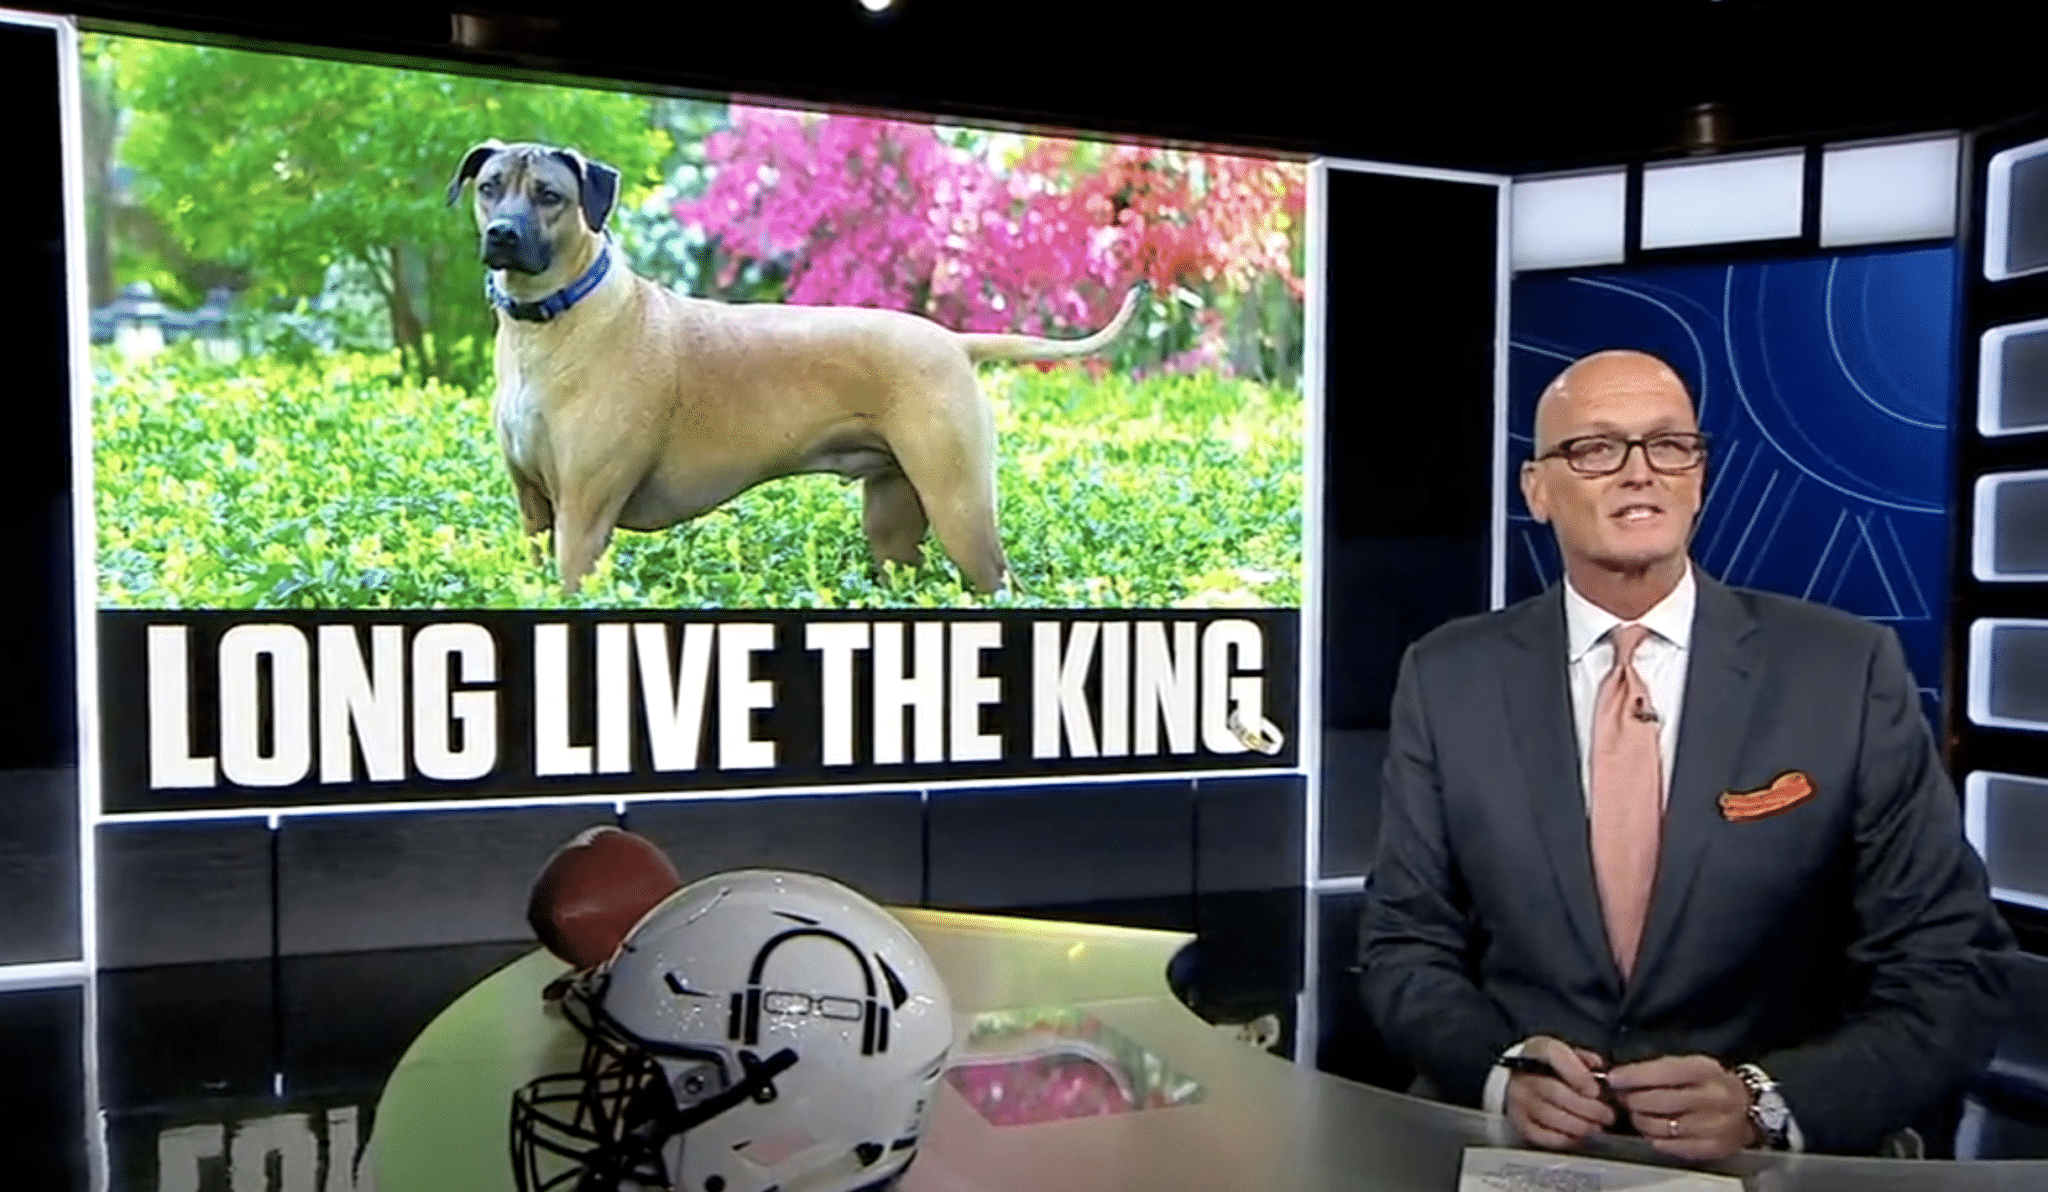 Scott Van Pelt Gave a Spectacular Eulogy About His Dog, Get The Tissues Ready